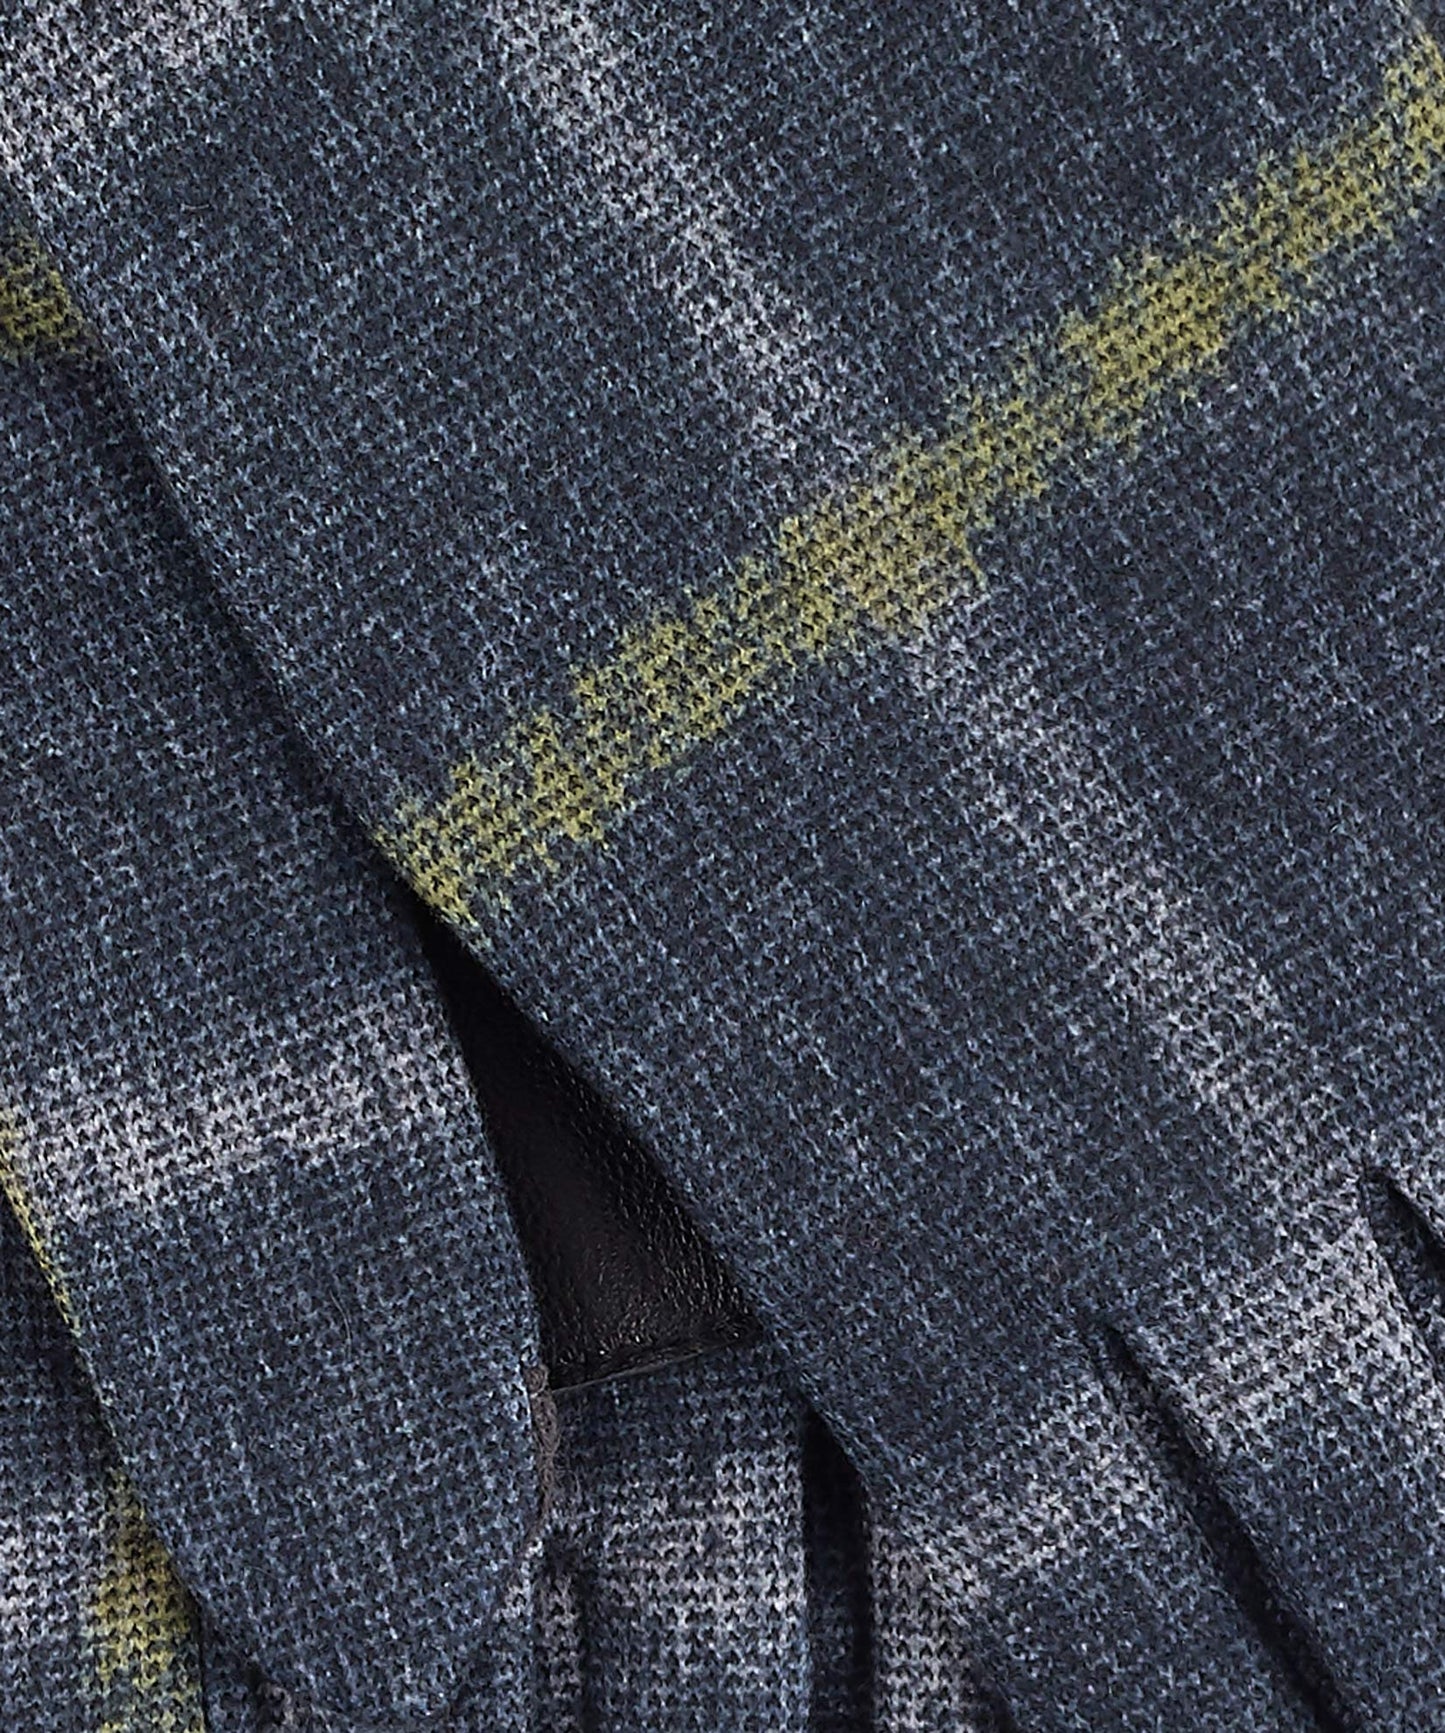 Superfine Down Plaid Glove in color Charcoal